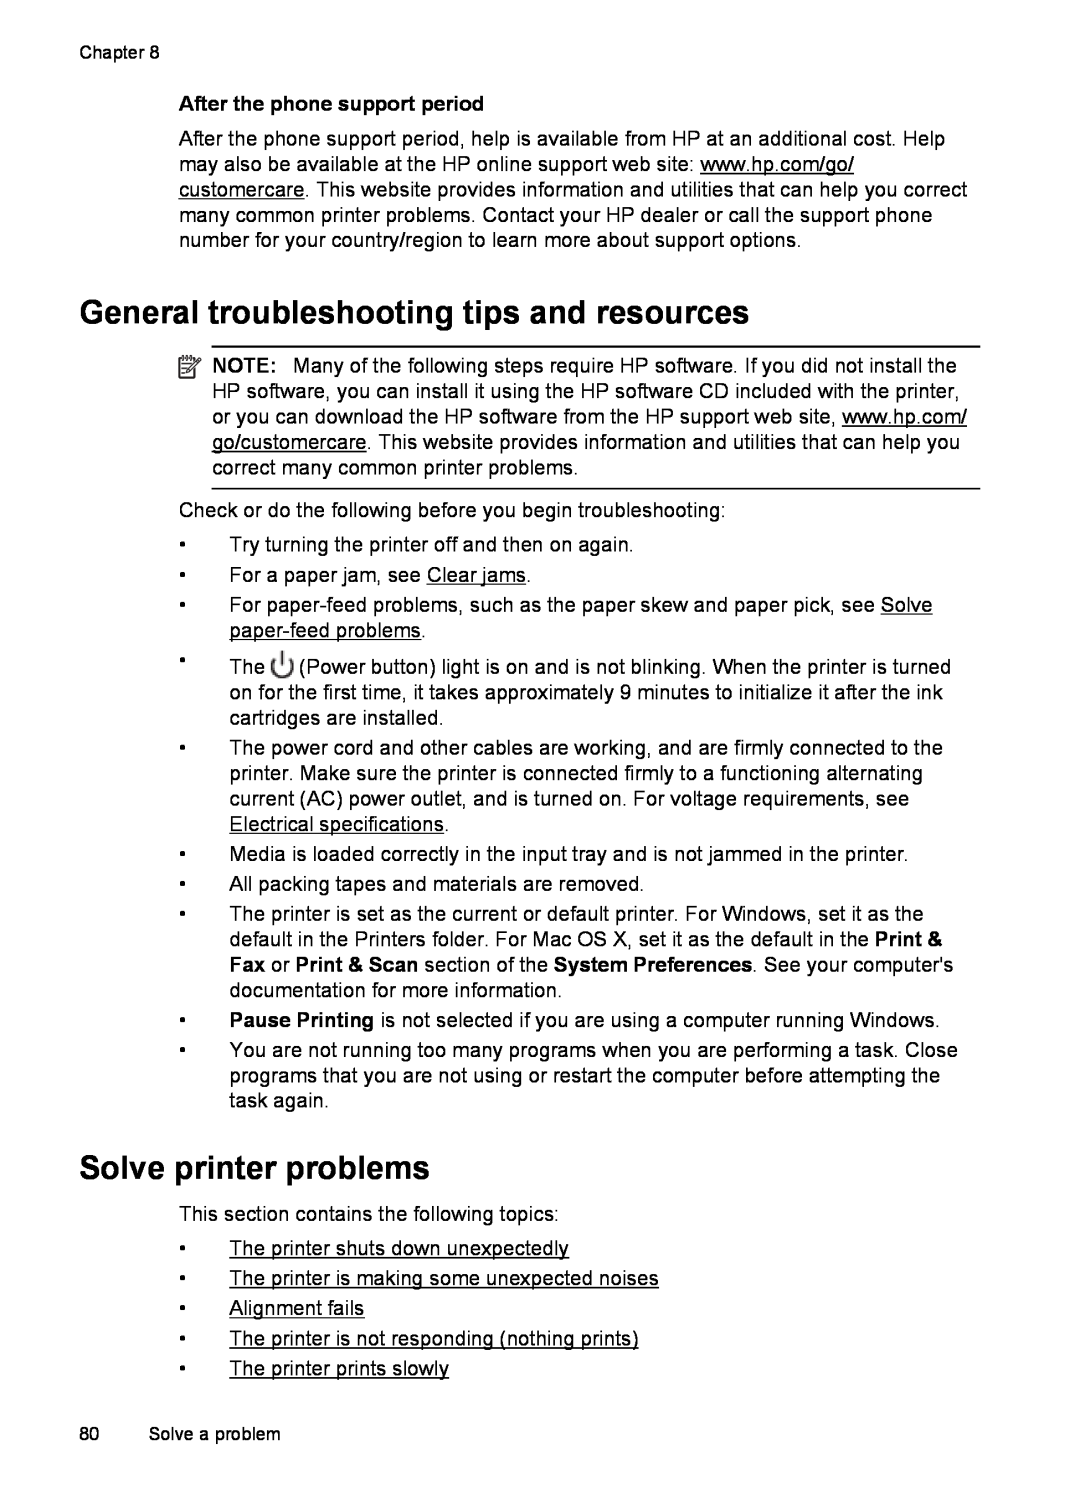 HP 6600 - H7 manual General troubleshooting tips and resources, Solve printer problems, After the phone support period 